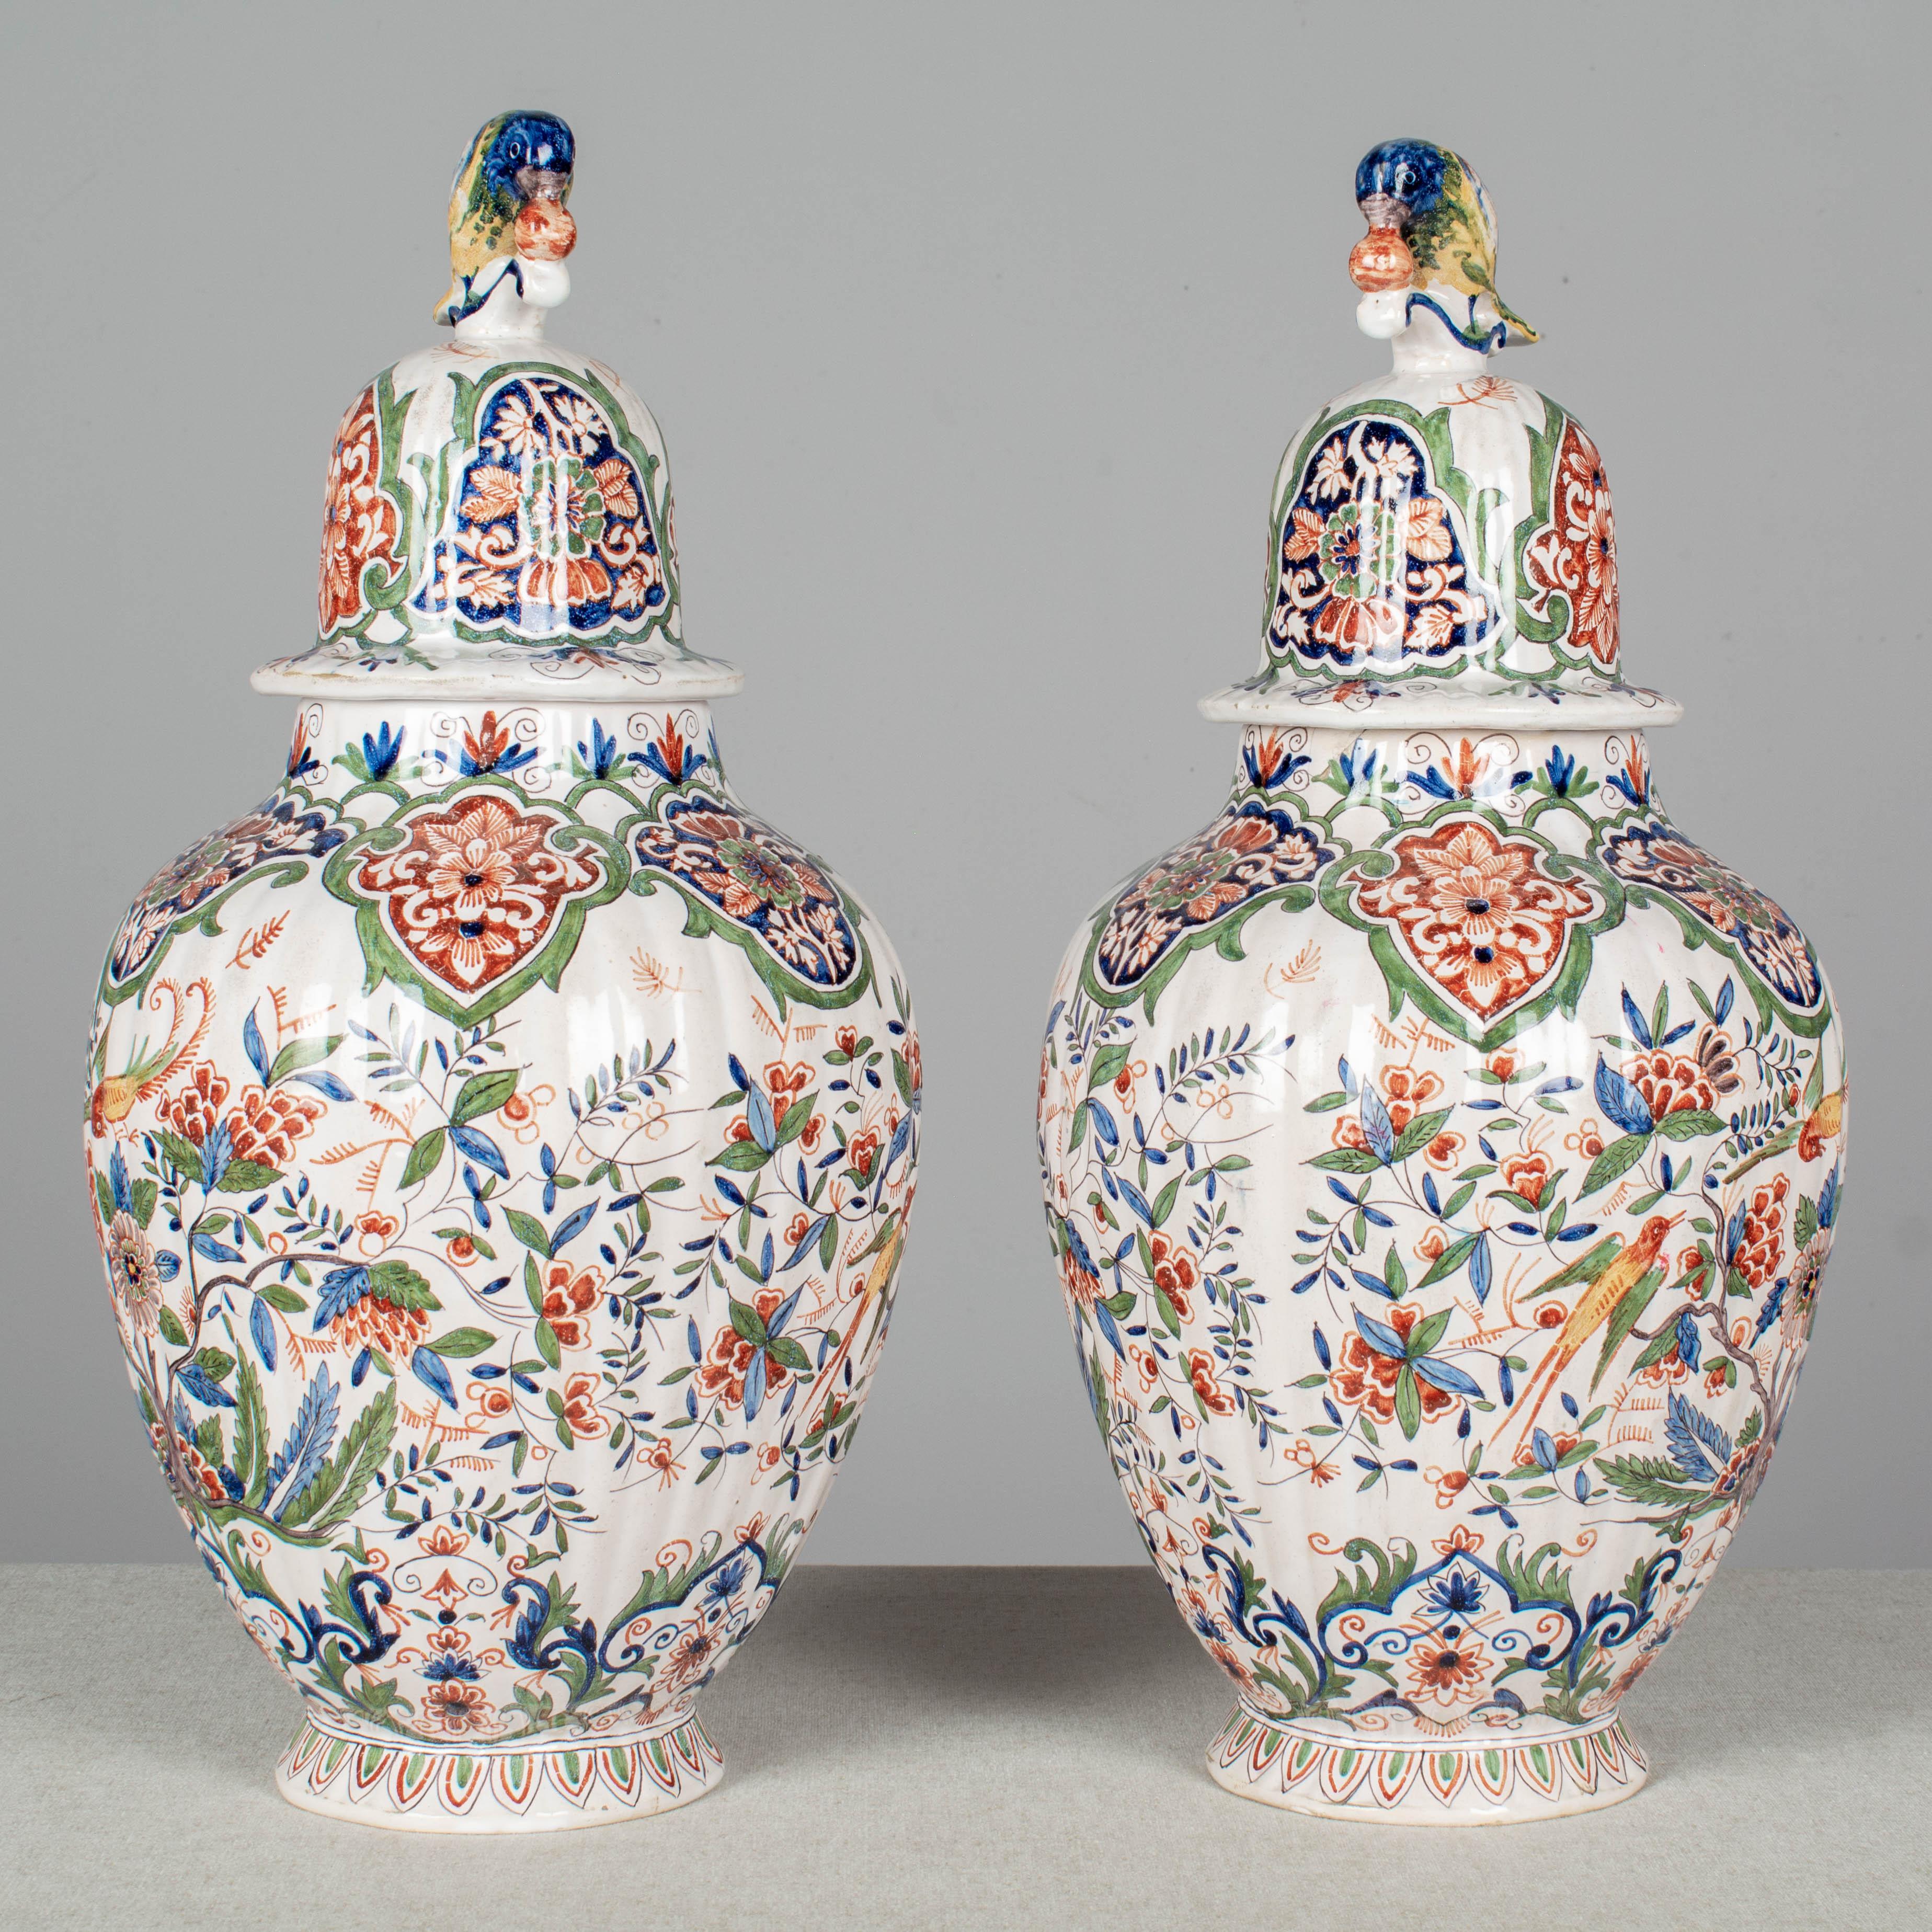 A lovely pair of 19th century Dutch polychrome painted delft faience urns, or ginger jars. Colorful hand painted decoration shows a pair of songbirds among stylized flowers in a palette of iron red, moss green, cobalt blue, bright yellow and orange.